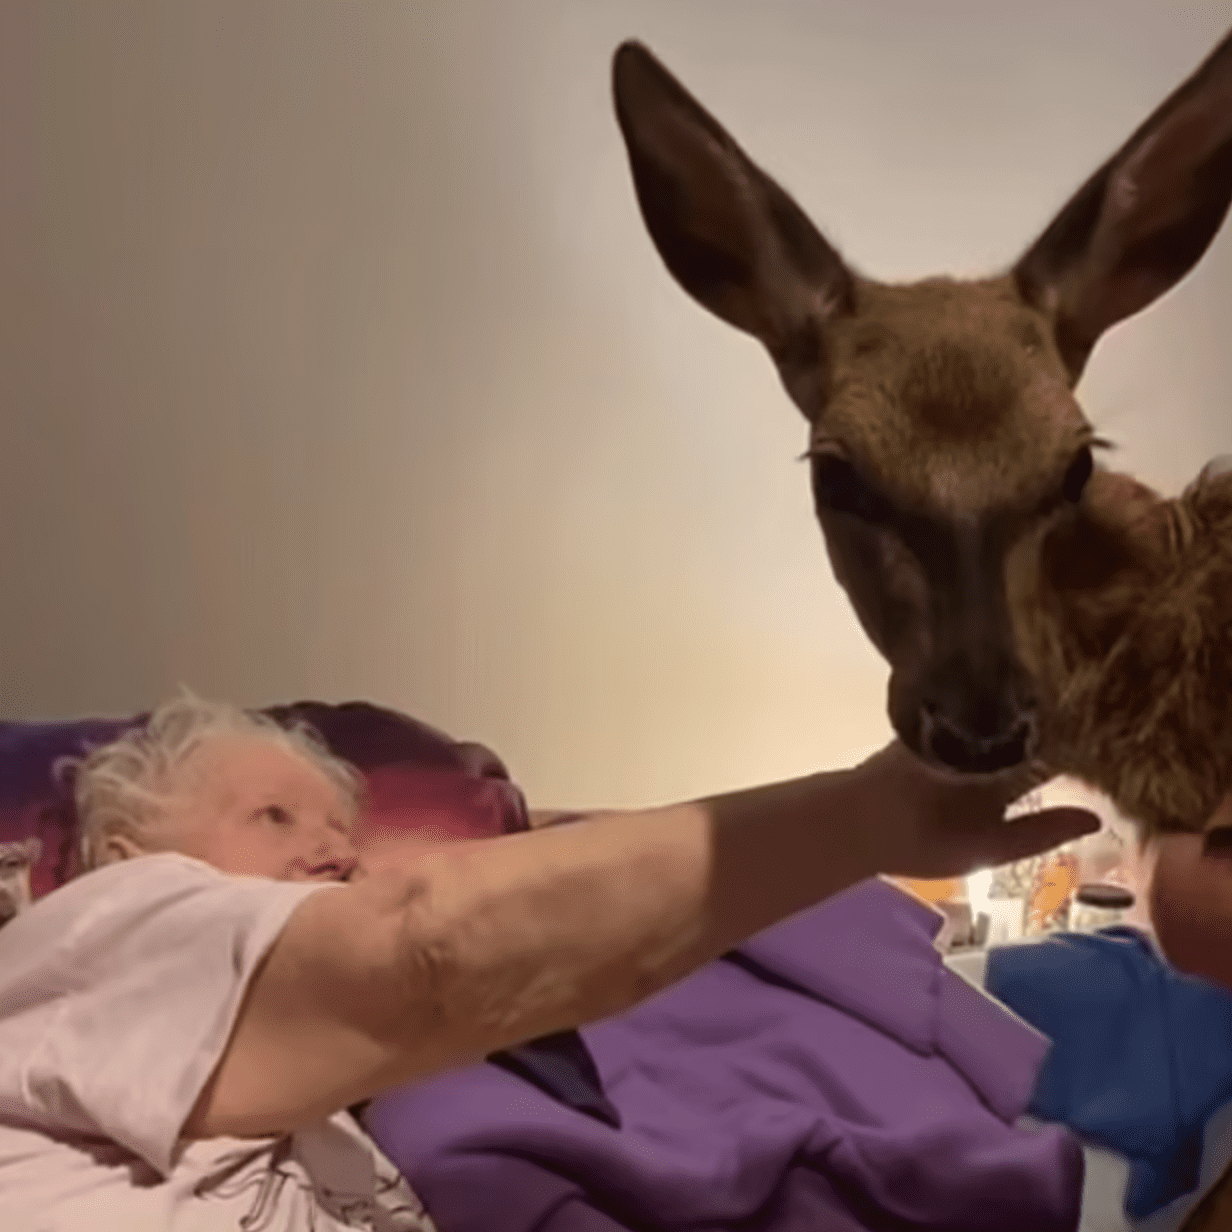 Sickly woman pets a deer in her final moments | Source: youtube.com/The OverSeaClip